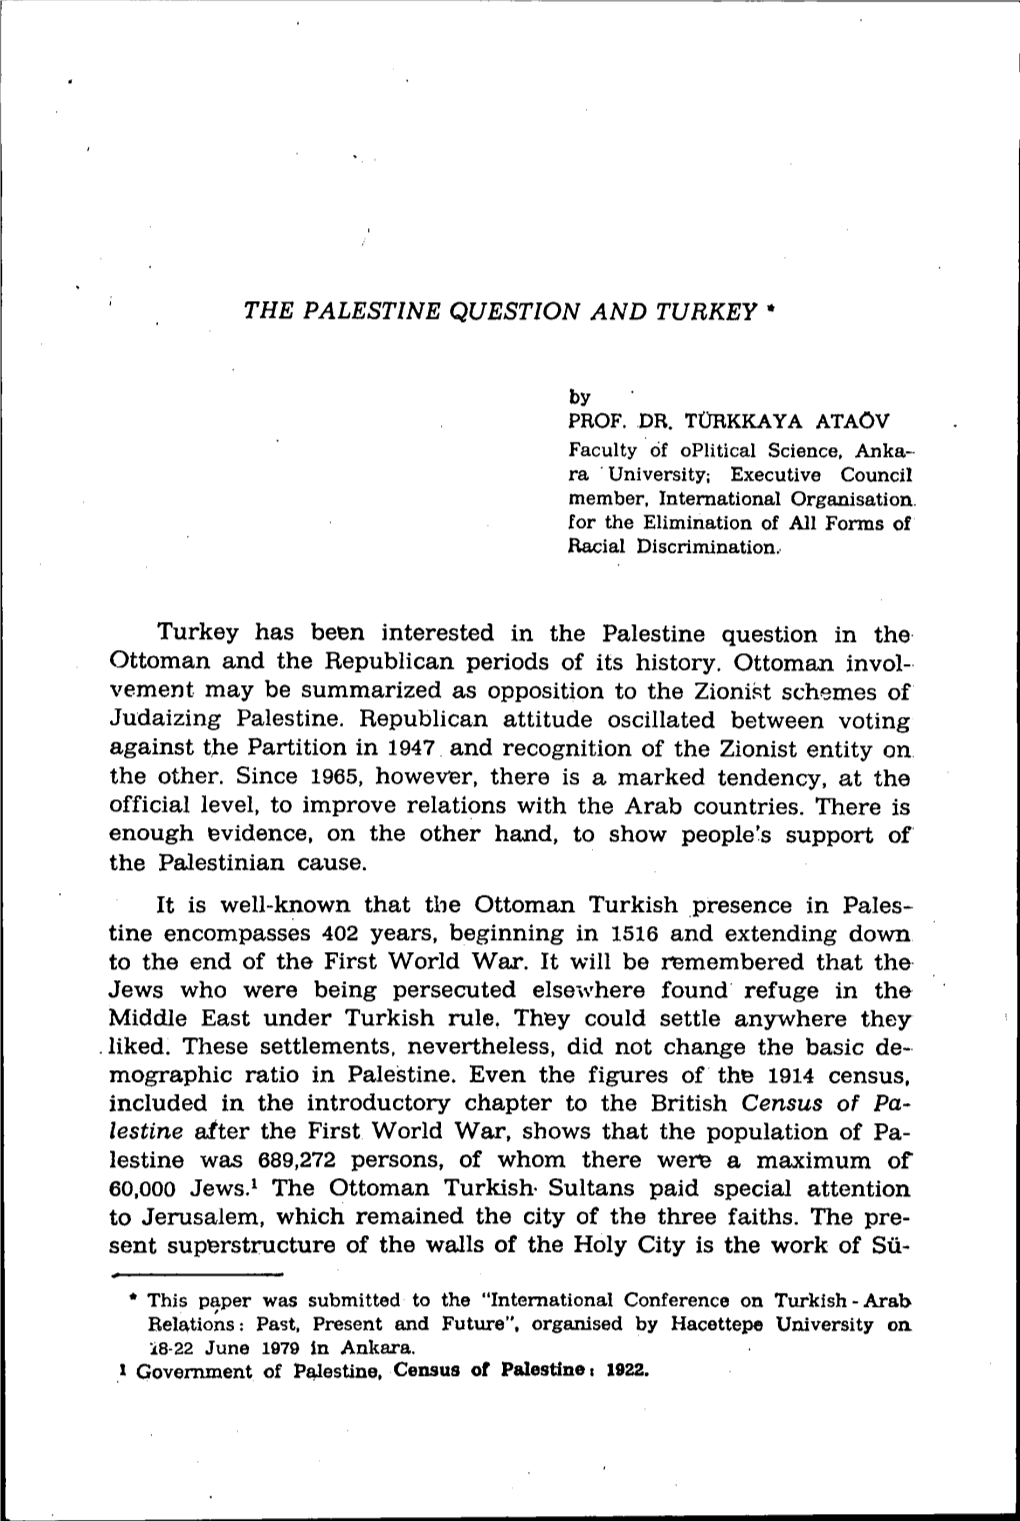 Turkey Has Been Interested in the Palestine Question in the Ottoman and the Republican Periods of Its History